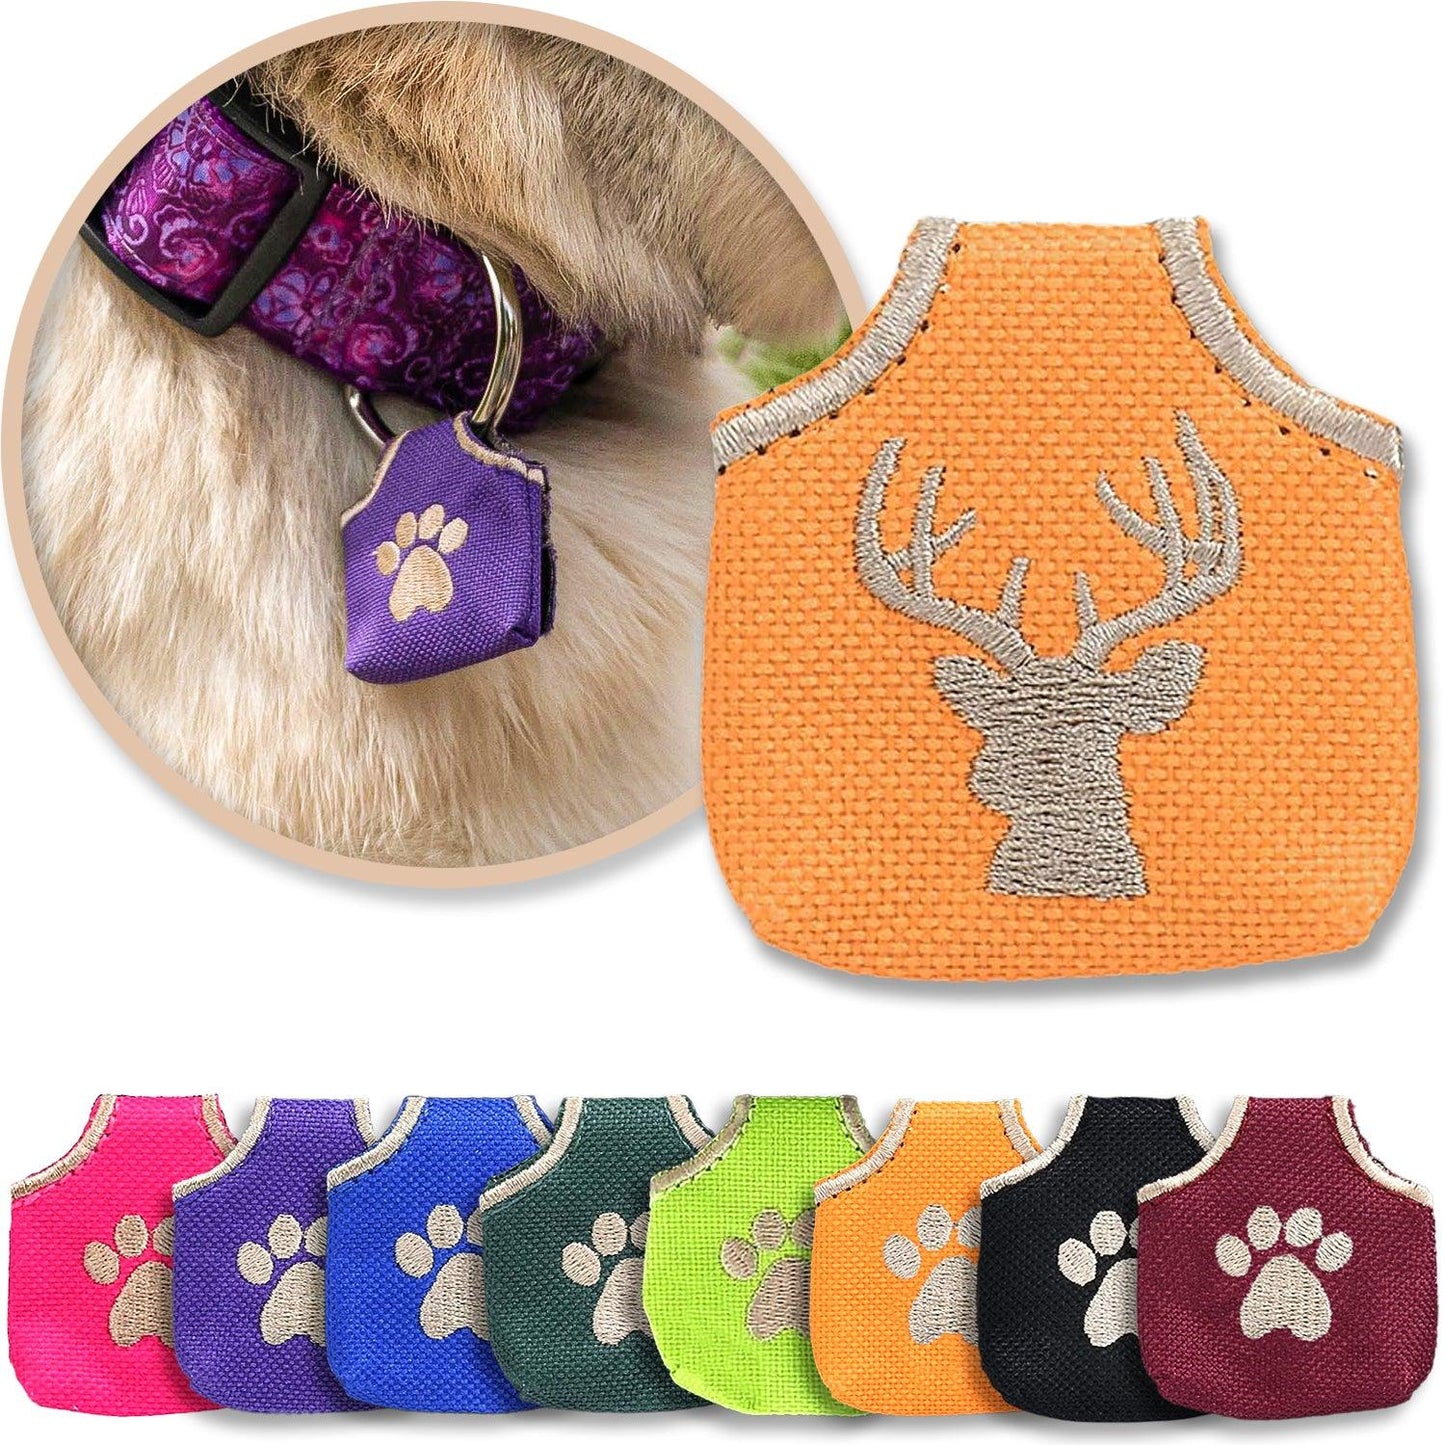 Orange 'Deer Head' dog tag cover shown with other colors